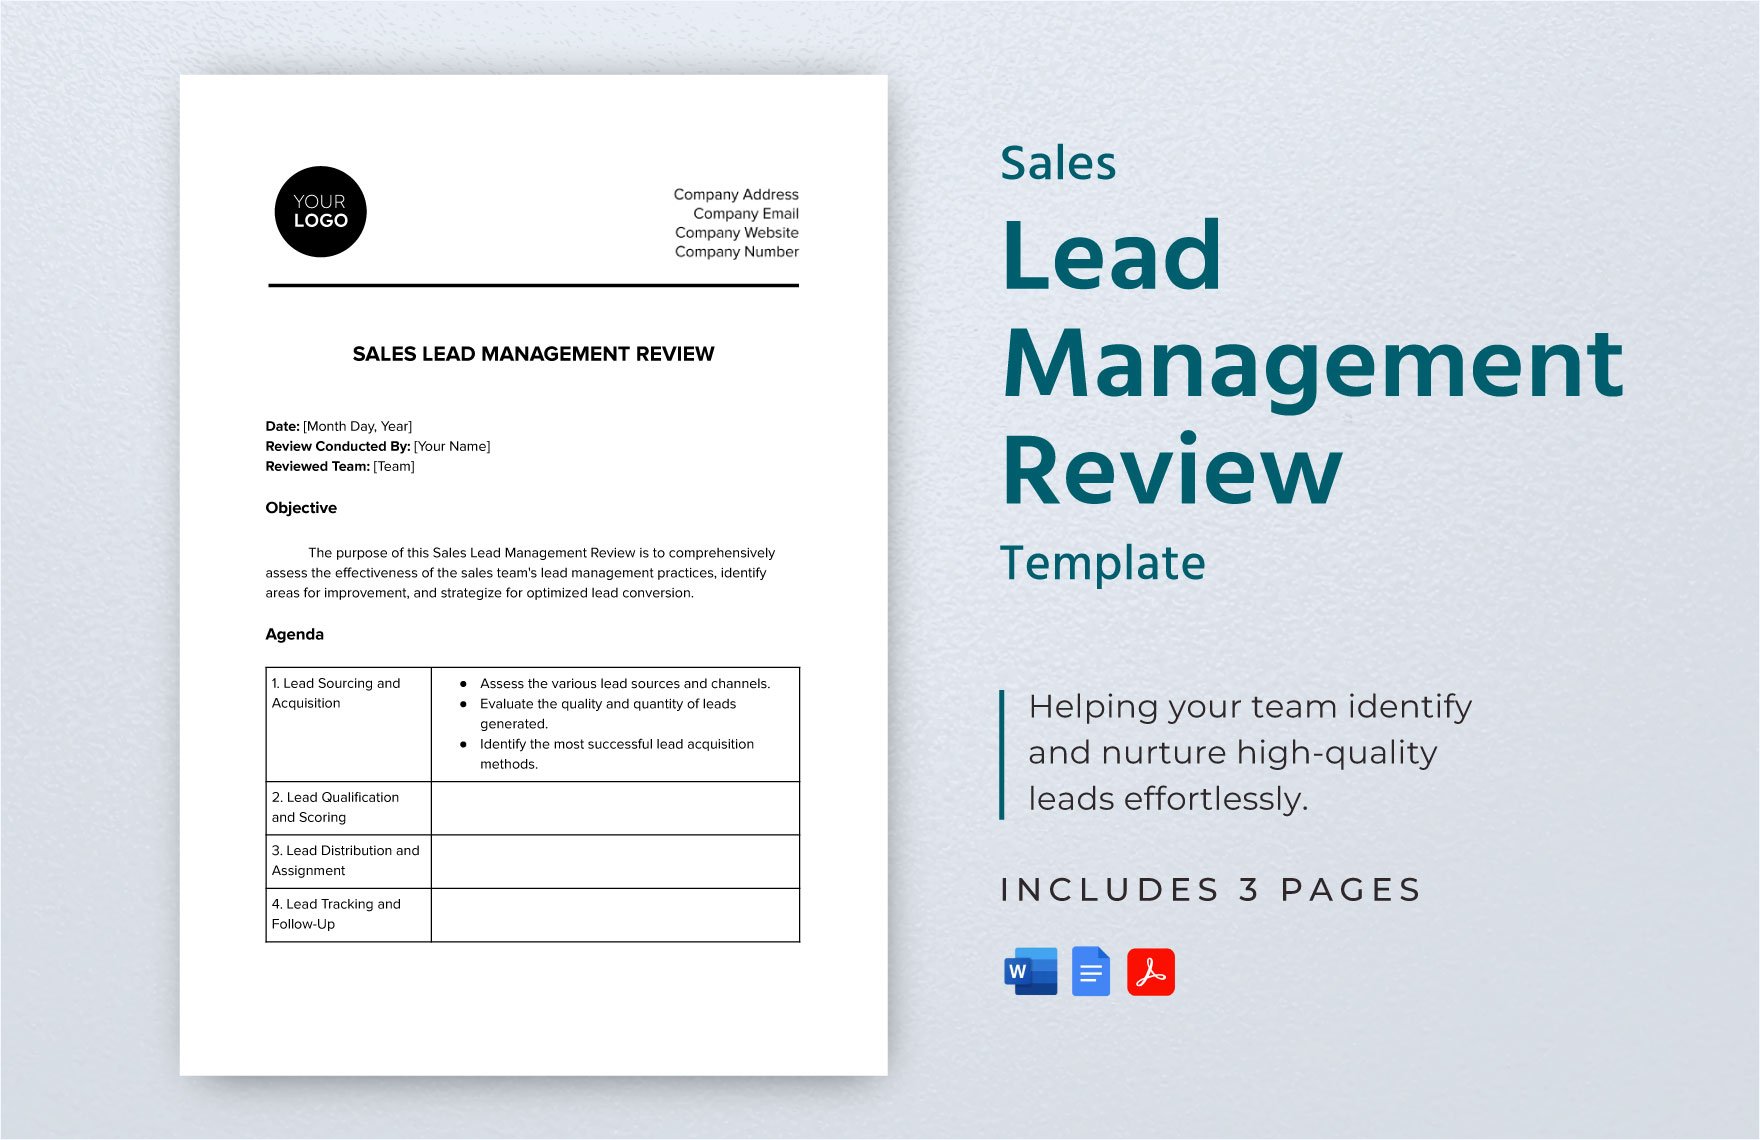 Sales Lead Management Review Template in Word, Google Docs, PDF